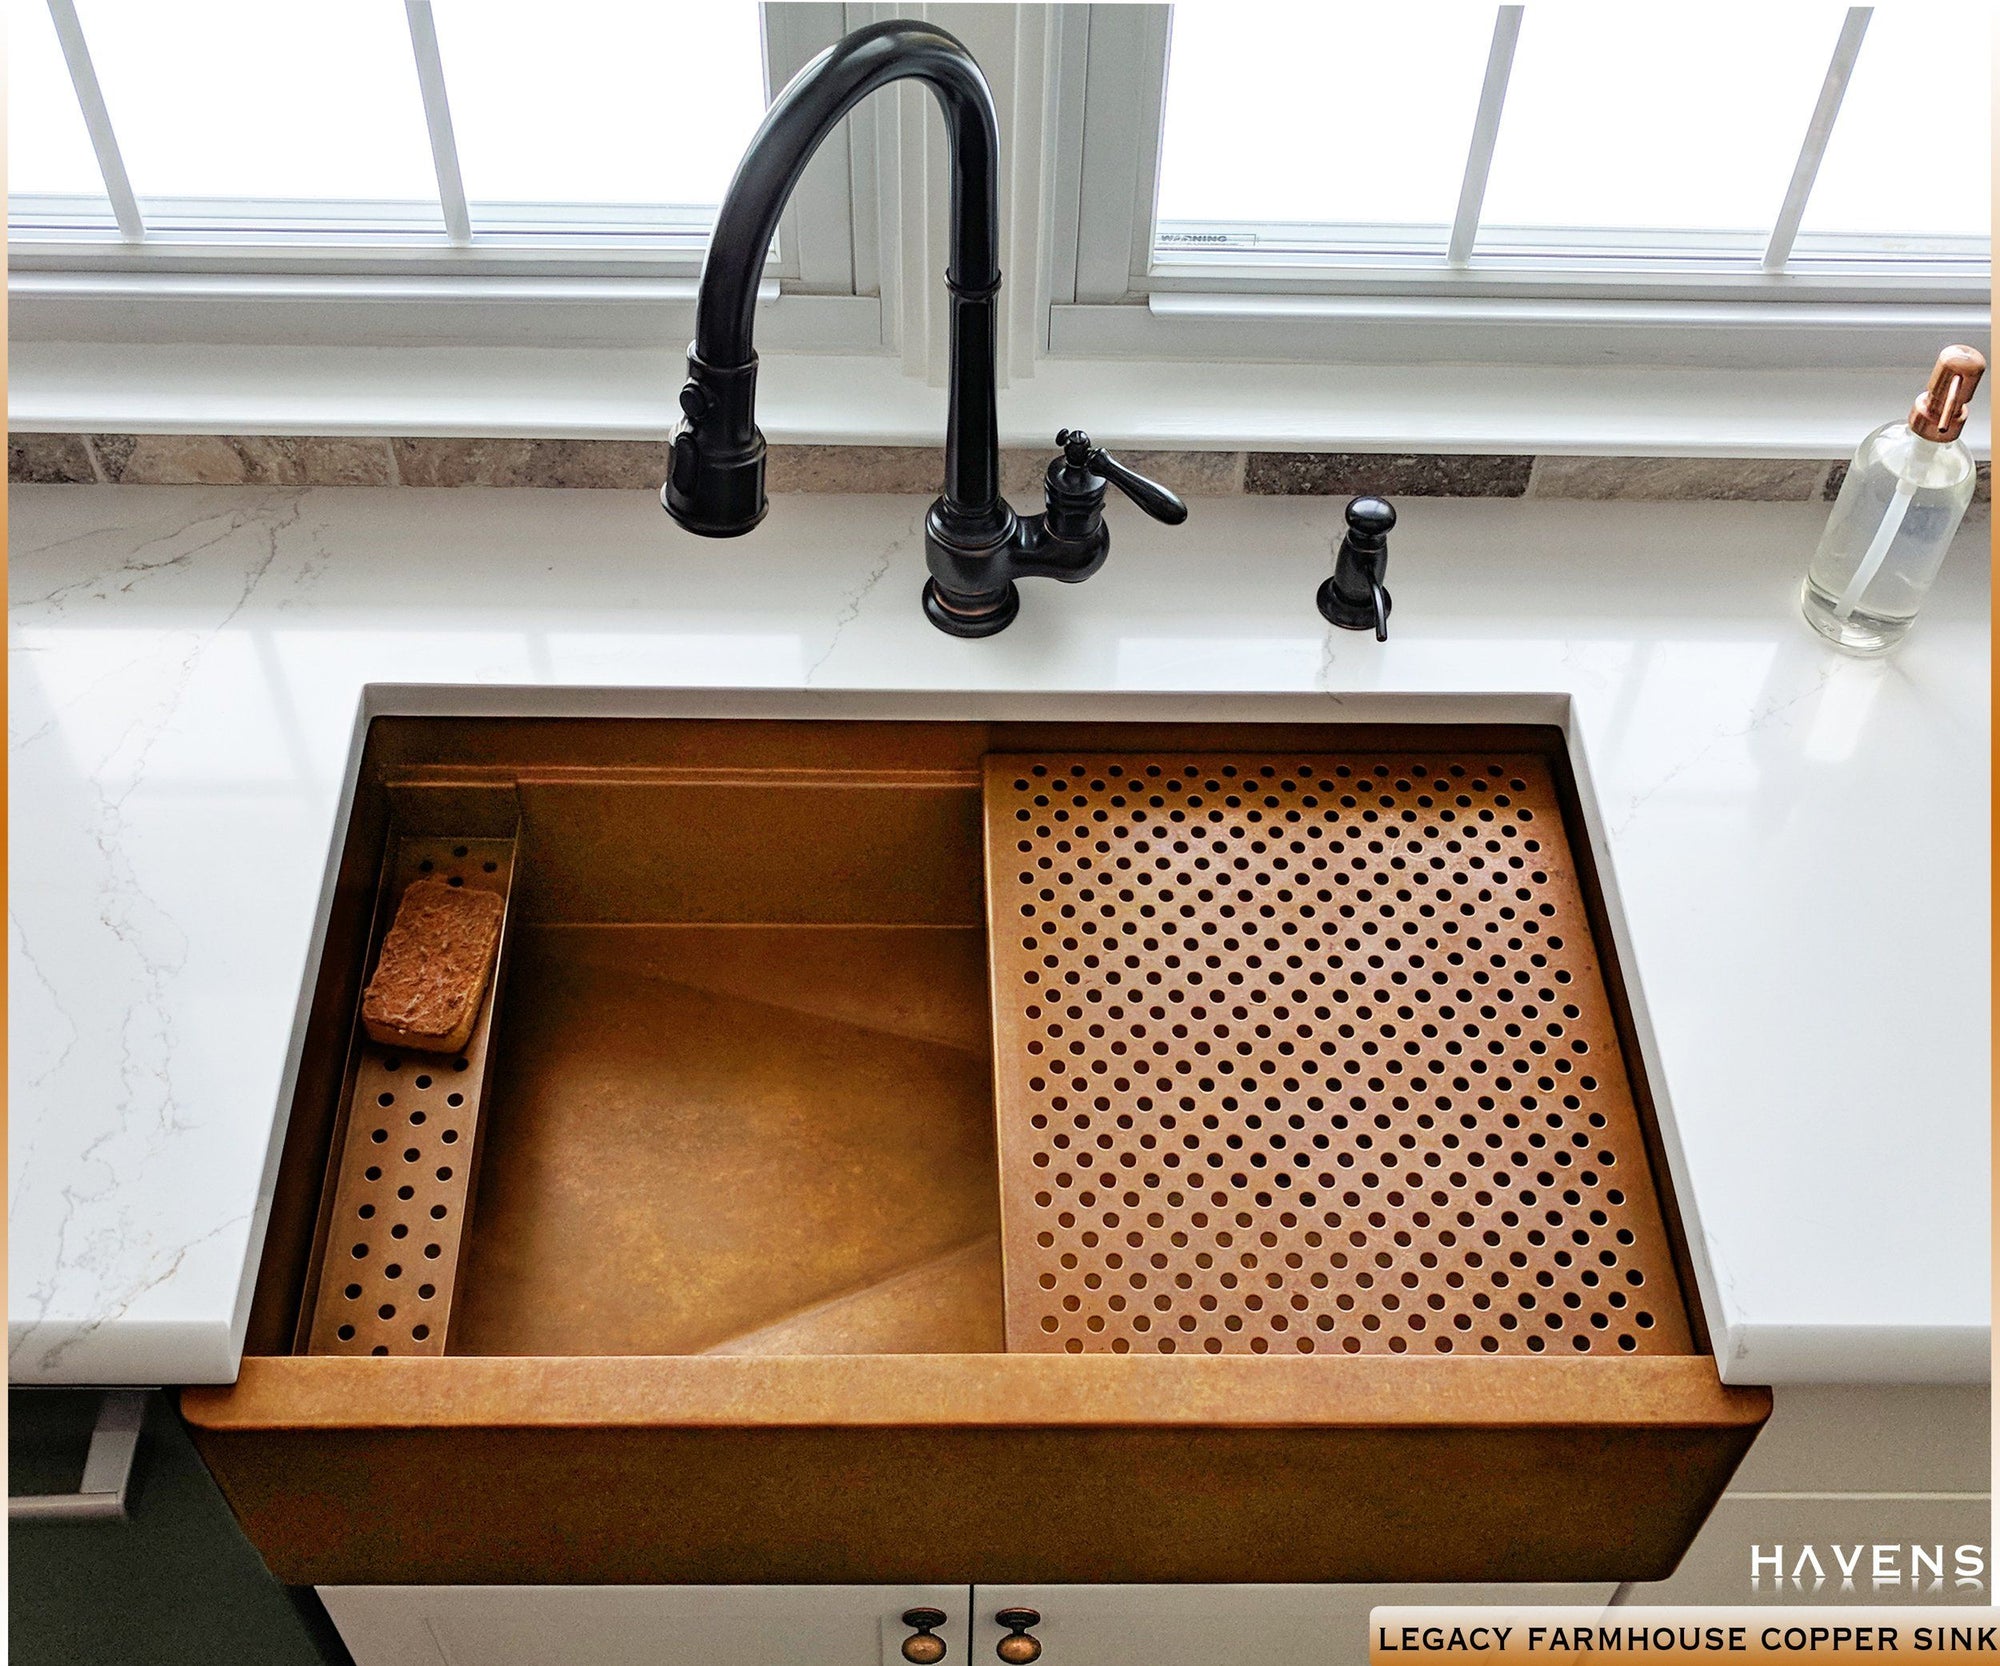 Copper farmhouse workstation sink with a built in ledge and 14 gauge smooth copper finish. Oil rubbed bronze faucet with a farm style sink. 